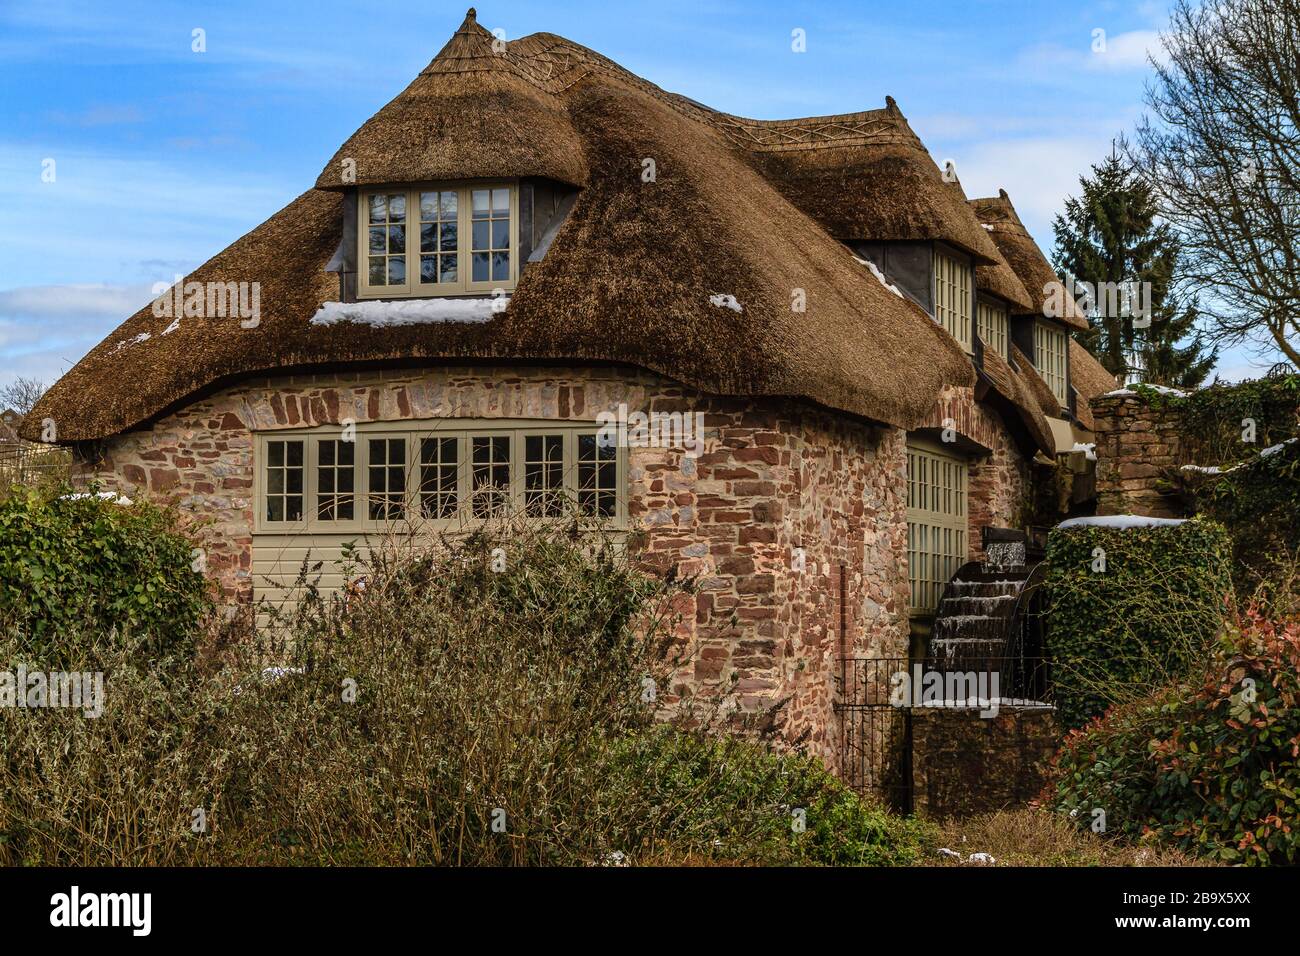 Cockington Mill Cottage with water wheel, in Cockington country park, Torquay, Devon, UK. March 2018. Stock Photo